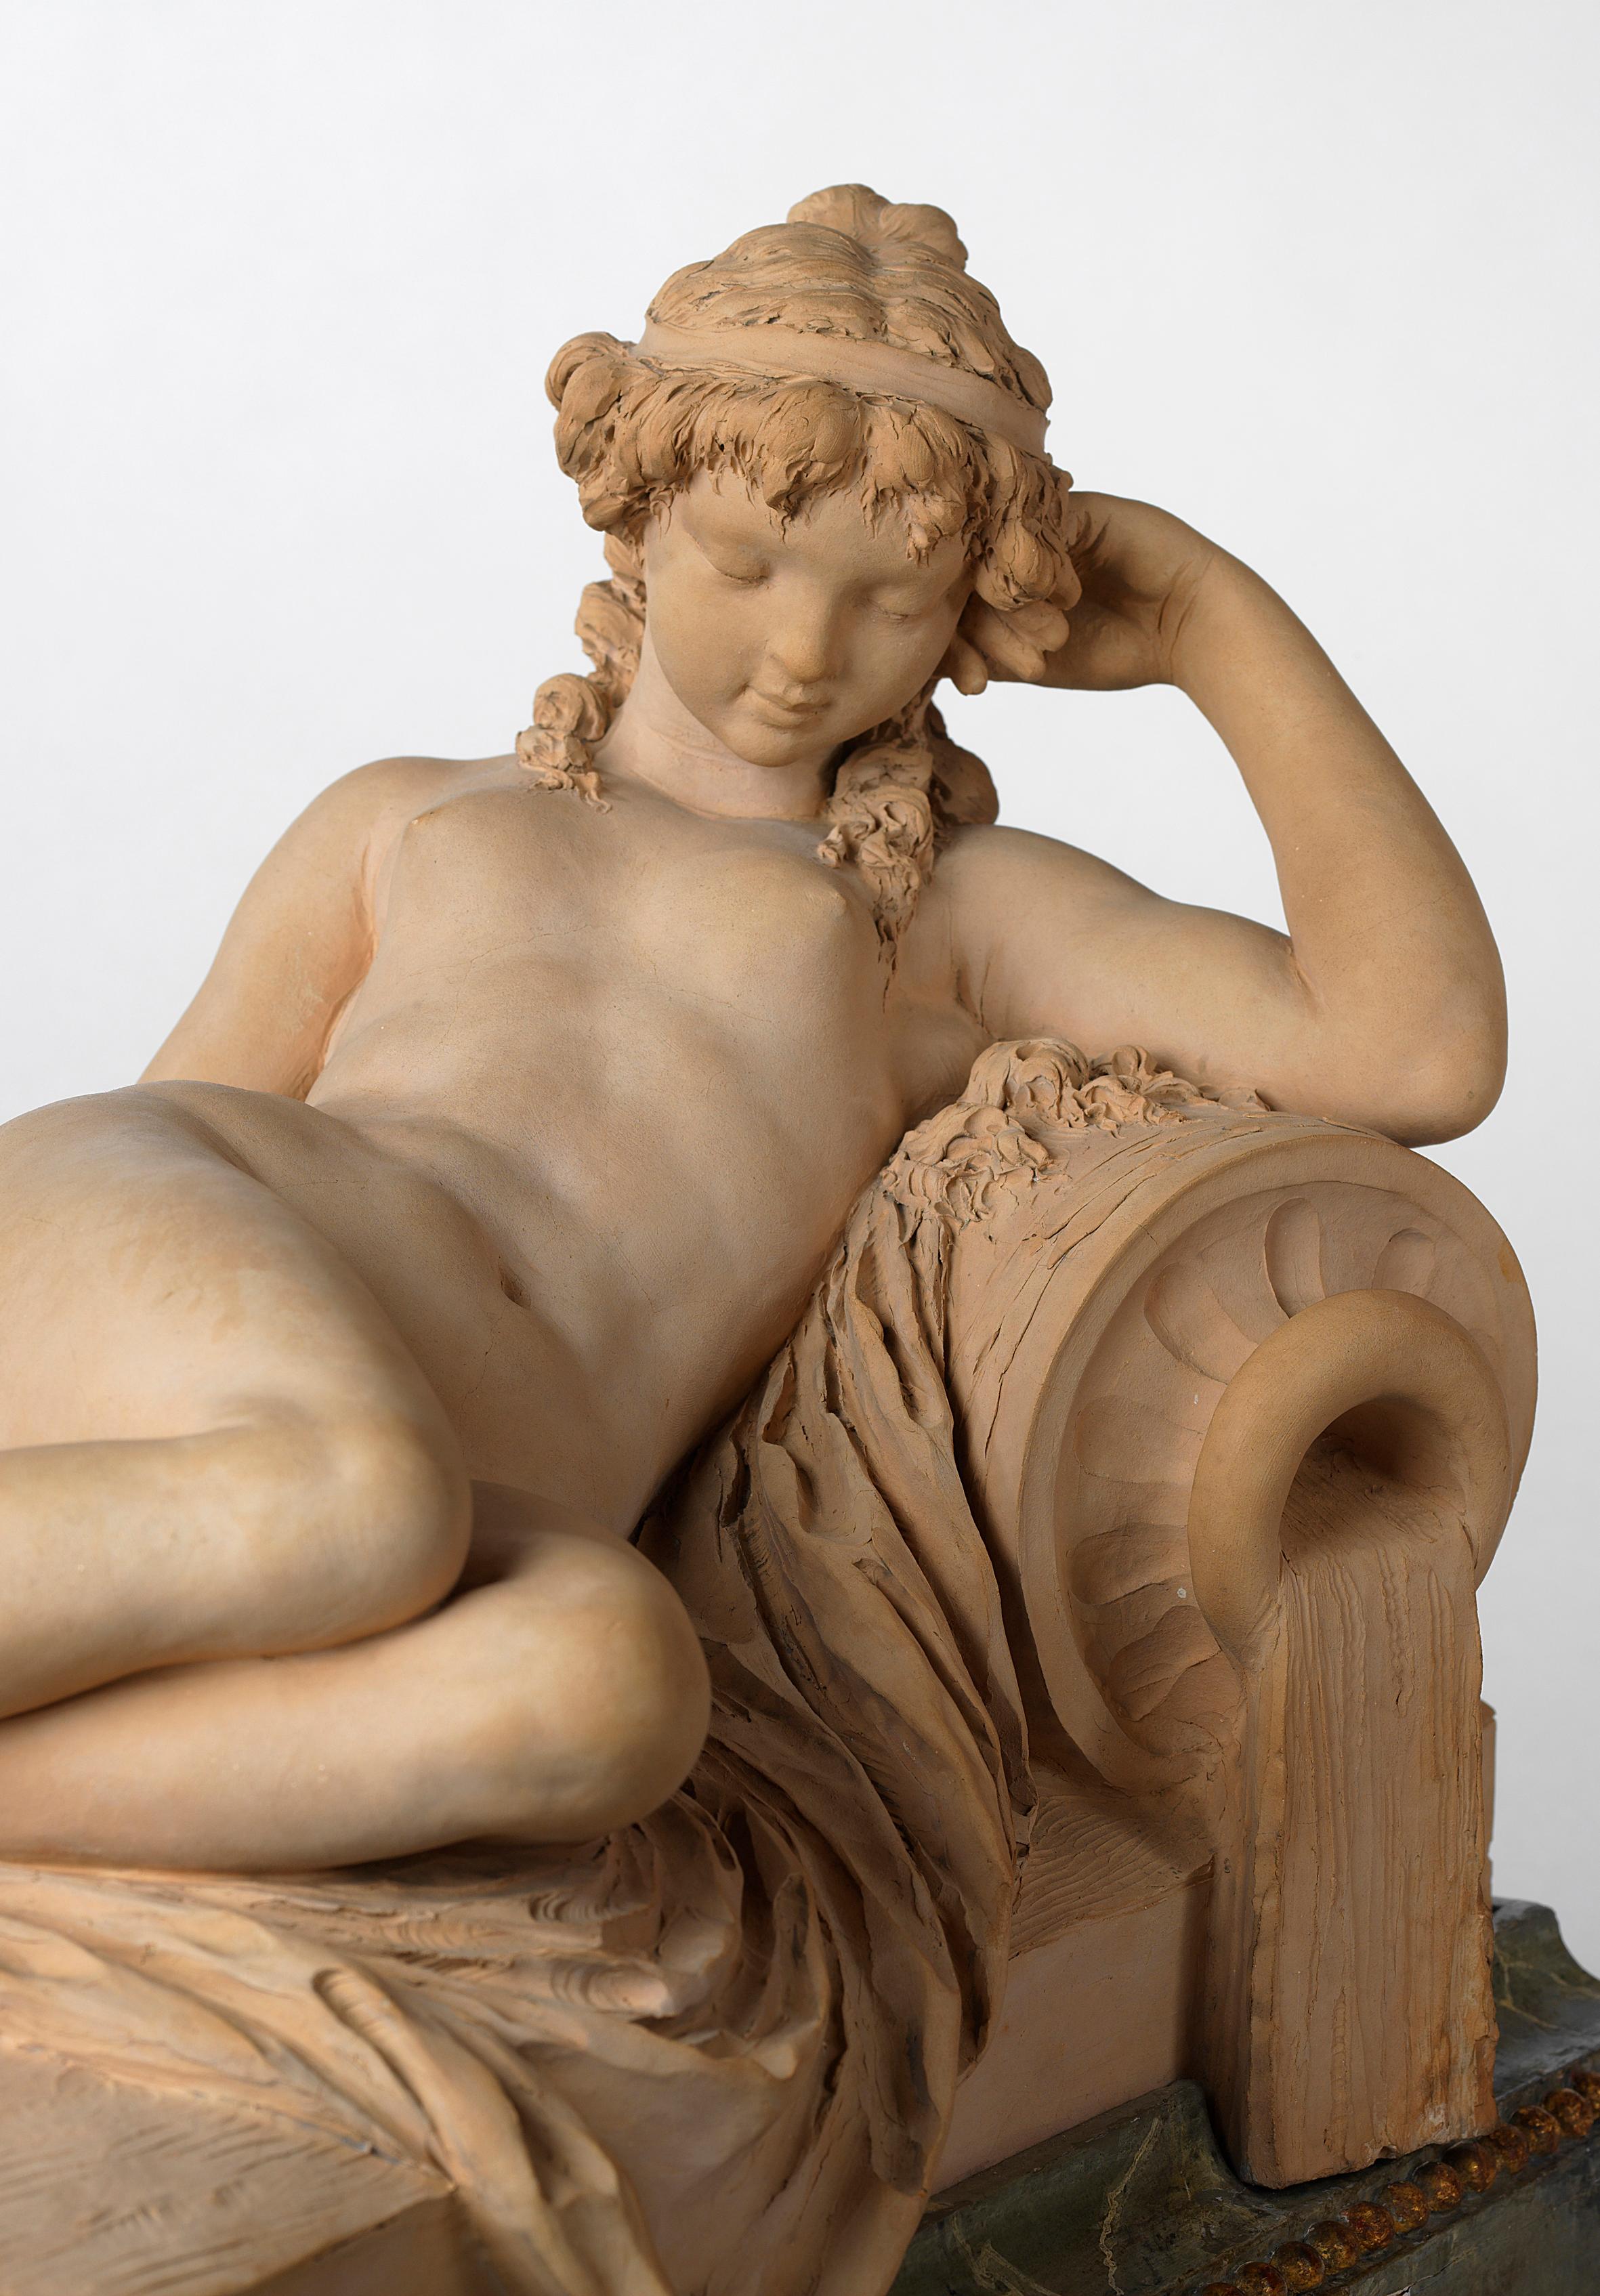 La Source after a marble model by Claude Michel Clodion

The naked figure of a nymph with her head resting on her arm and her eyes closed, is reclining on drapery, and leaning against an overturned urn, which is issuing water. On marbleized wood